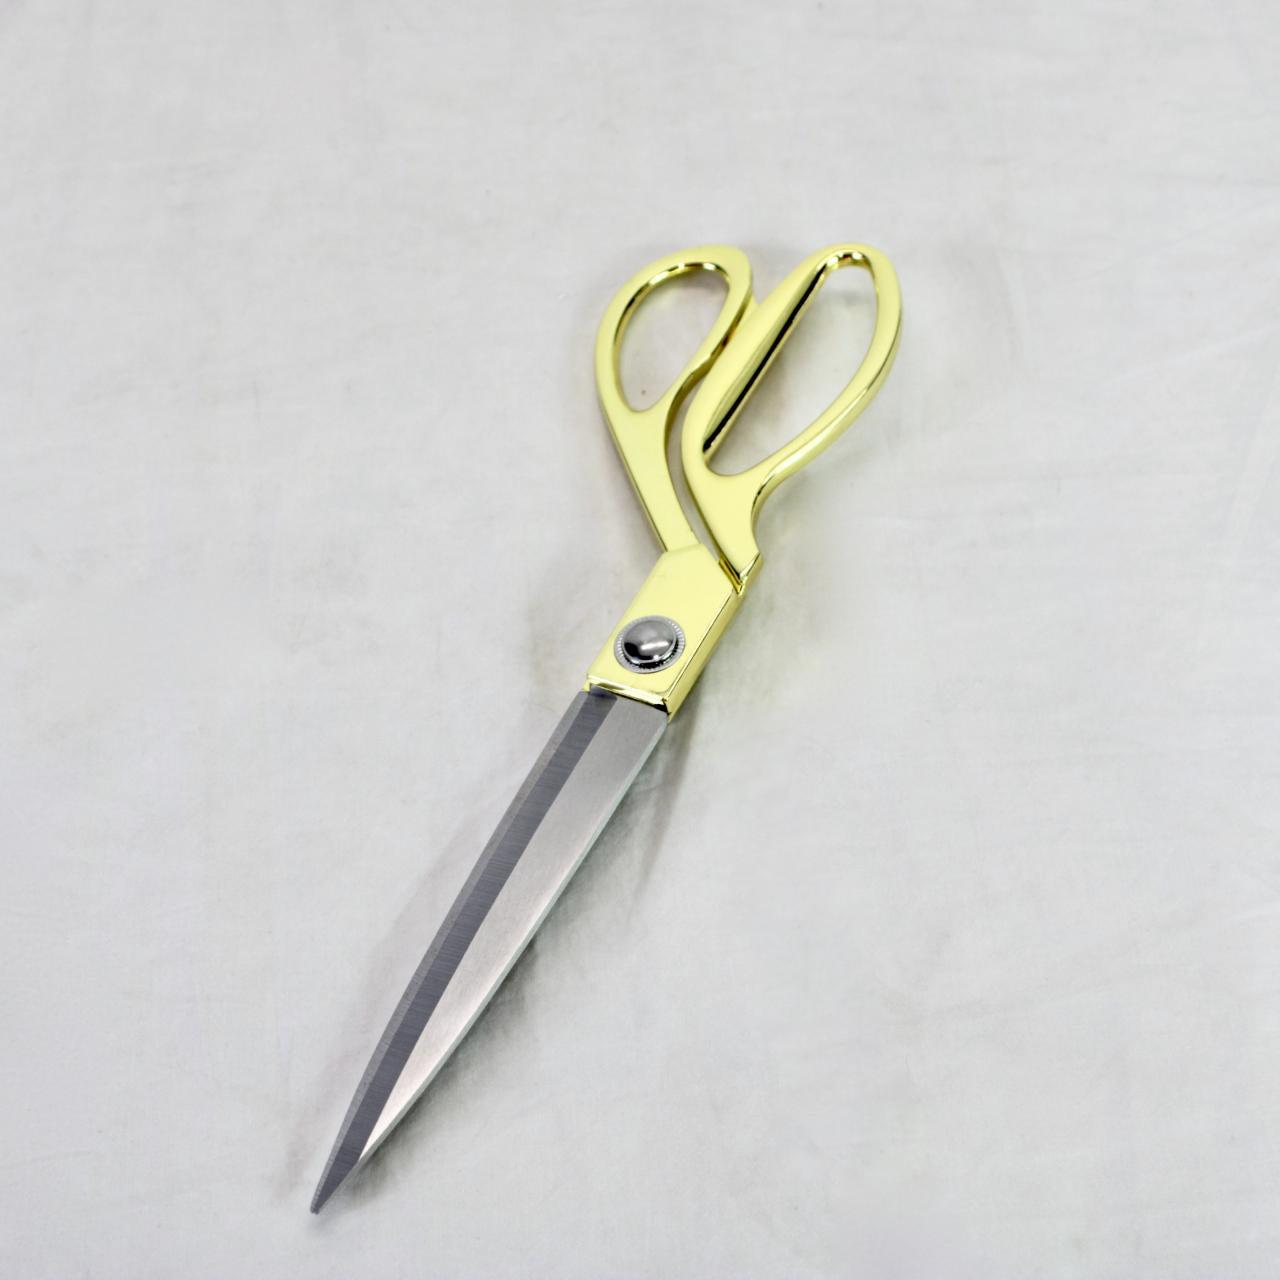 5-IN-1 Sabatier Shears SCISSORS High Carbon SS -Sharpening Sleeve-SOFT  GRIP-NEW